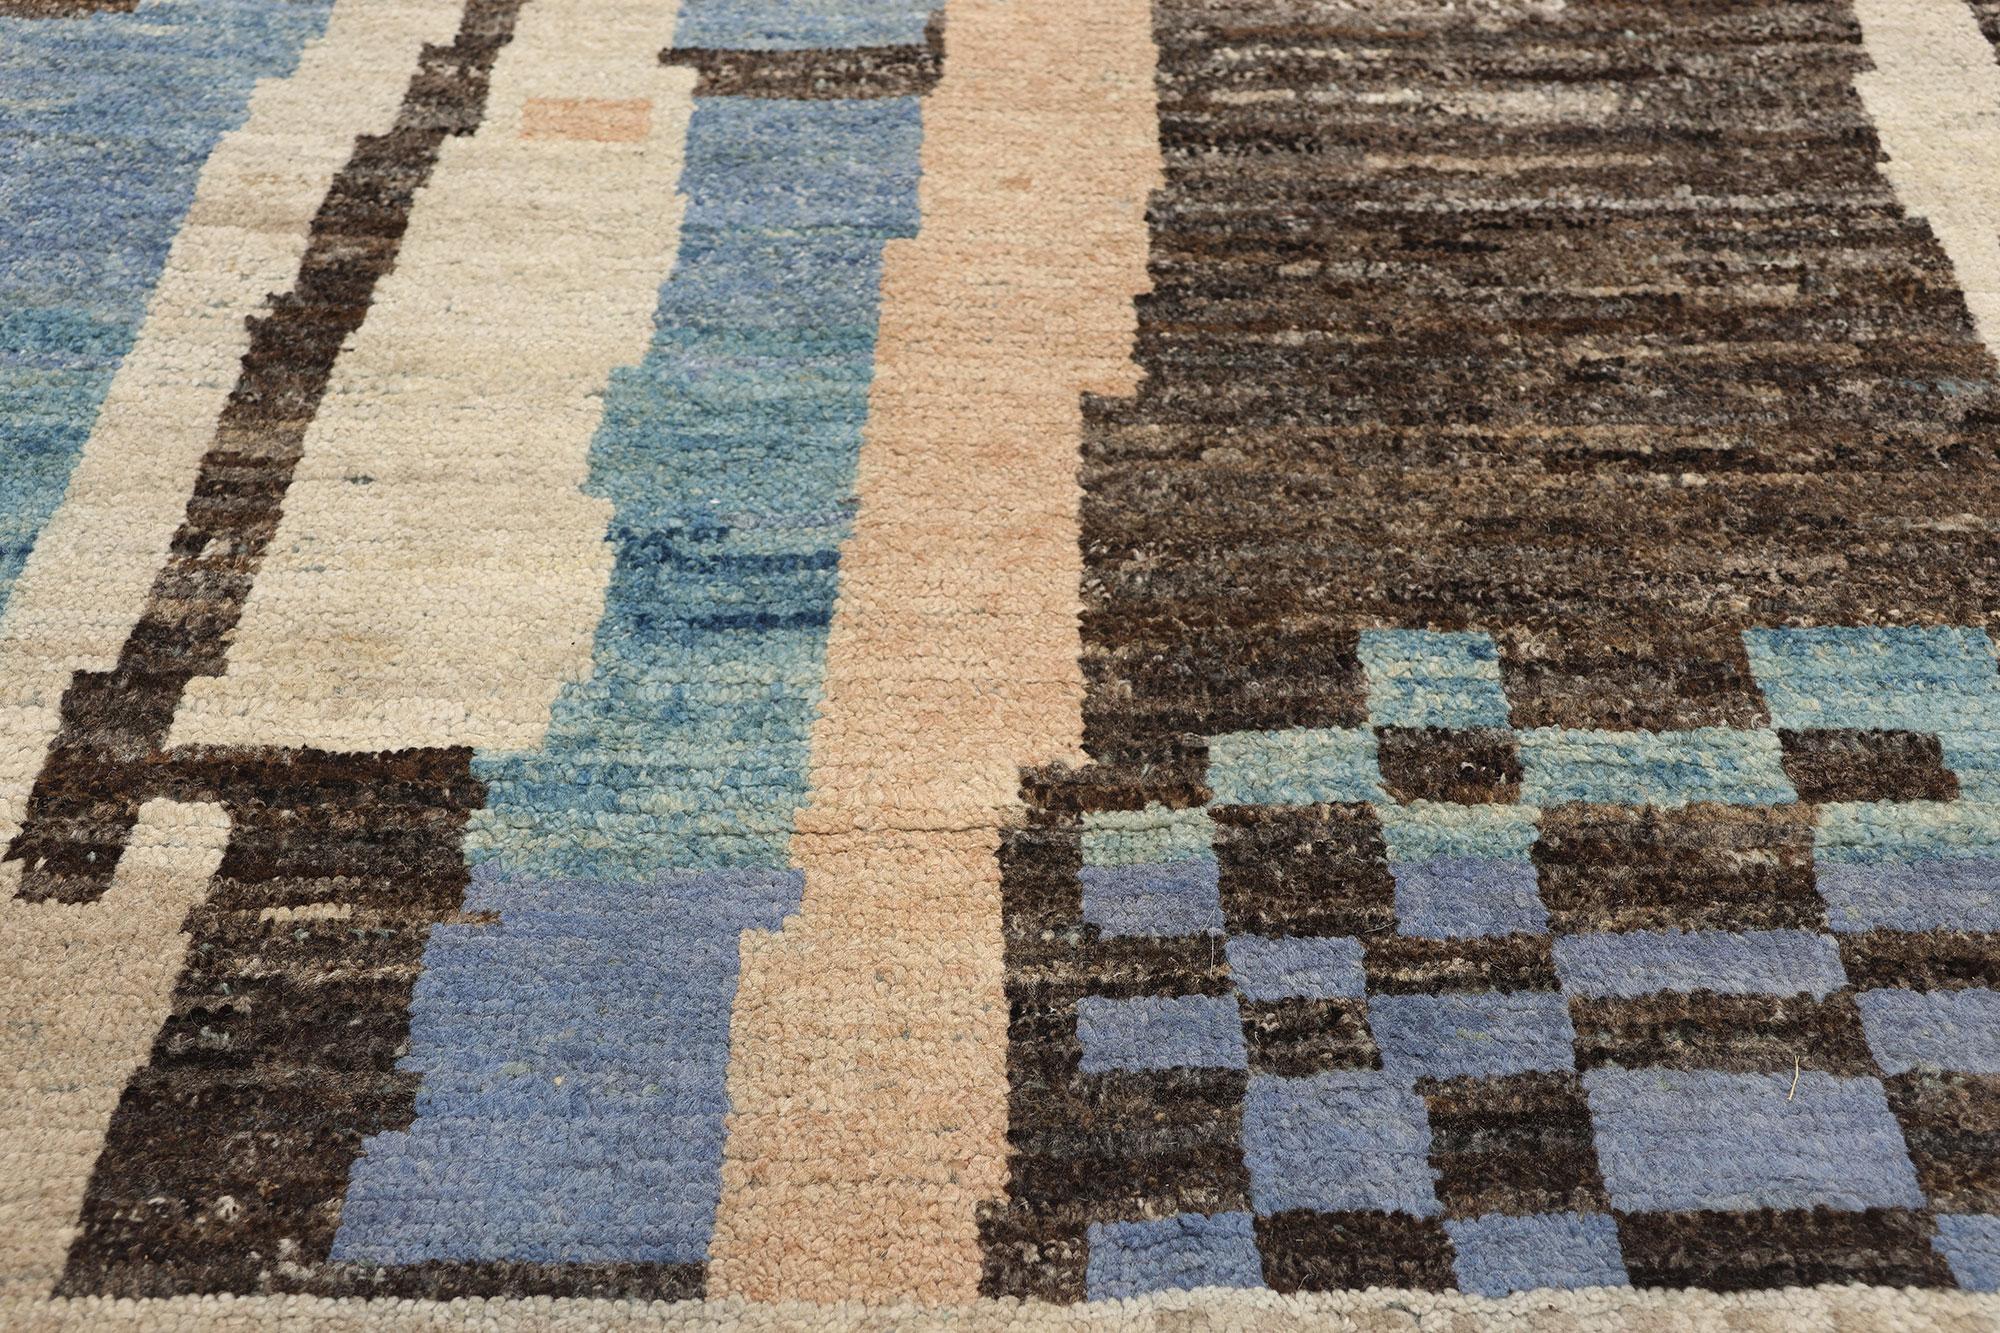 Organic Modern Brutalist Moroccan Rug, Biophilic Design Meets Brutalism In New Condition For Sale In Dallas, TX